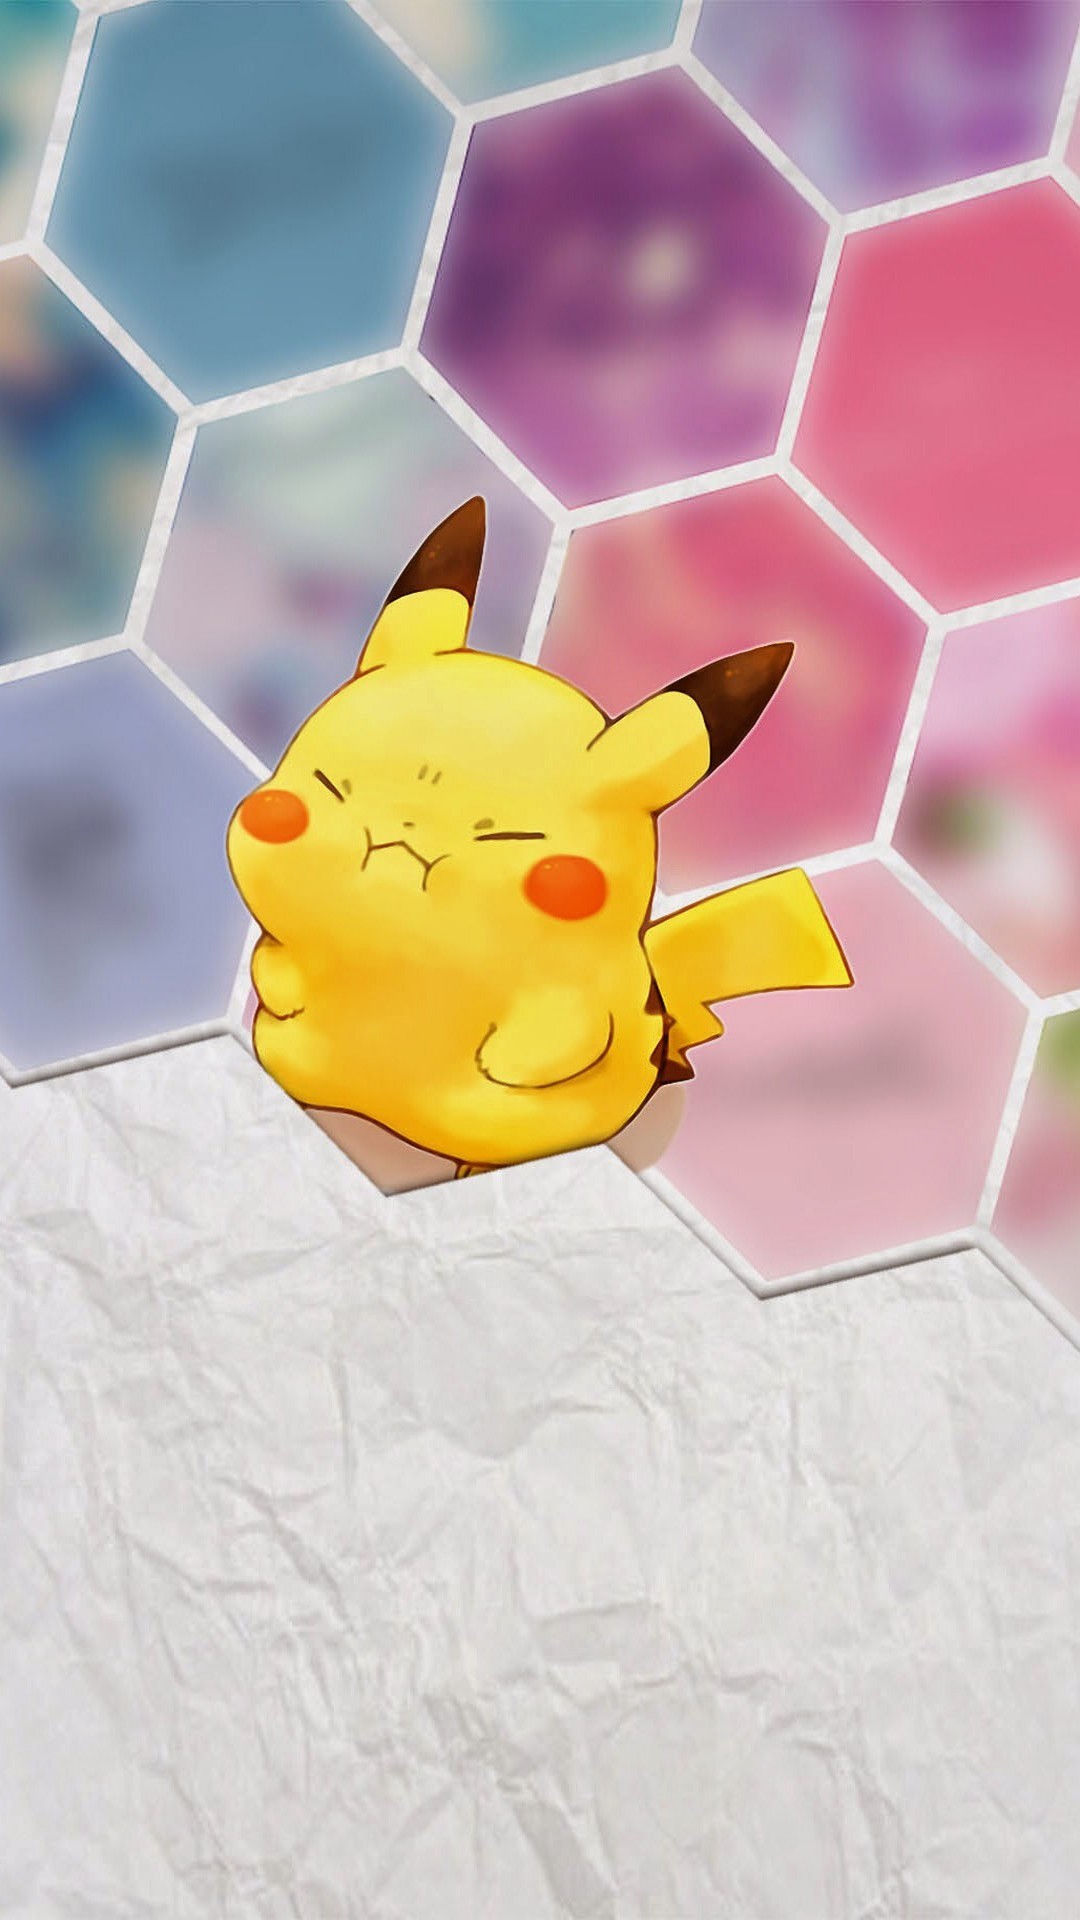 1080x1920 Tap image for more iPhone 6 Plus Pikachu wallpapers! Pikachu - @mobile9 |  Cute